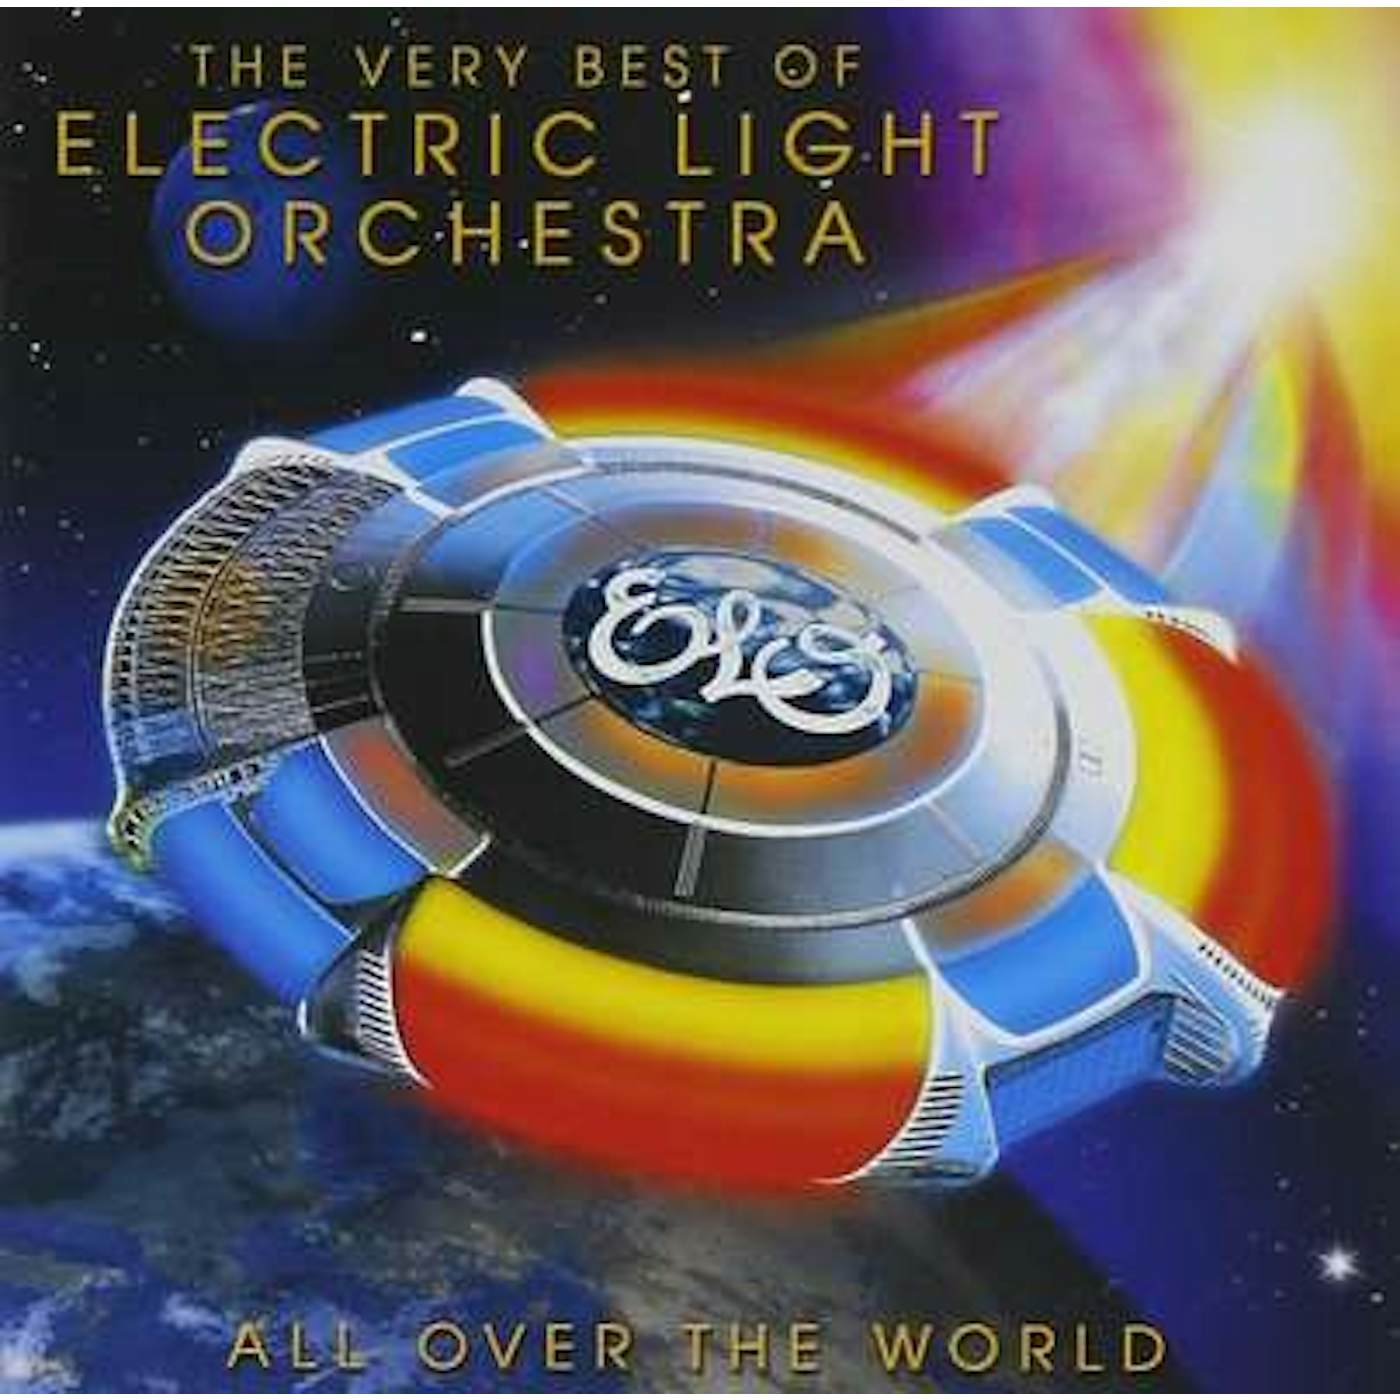 The Very Best of ELO (Electric Light Orchestra) - All Over The World